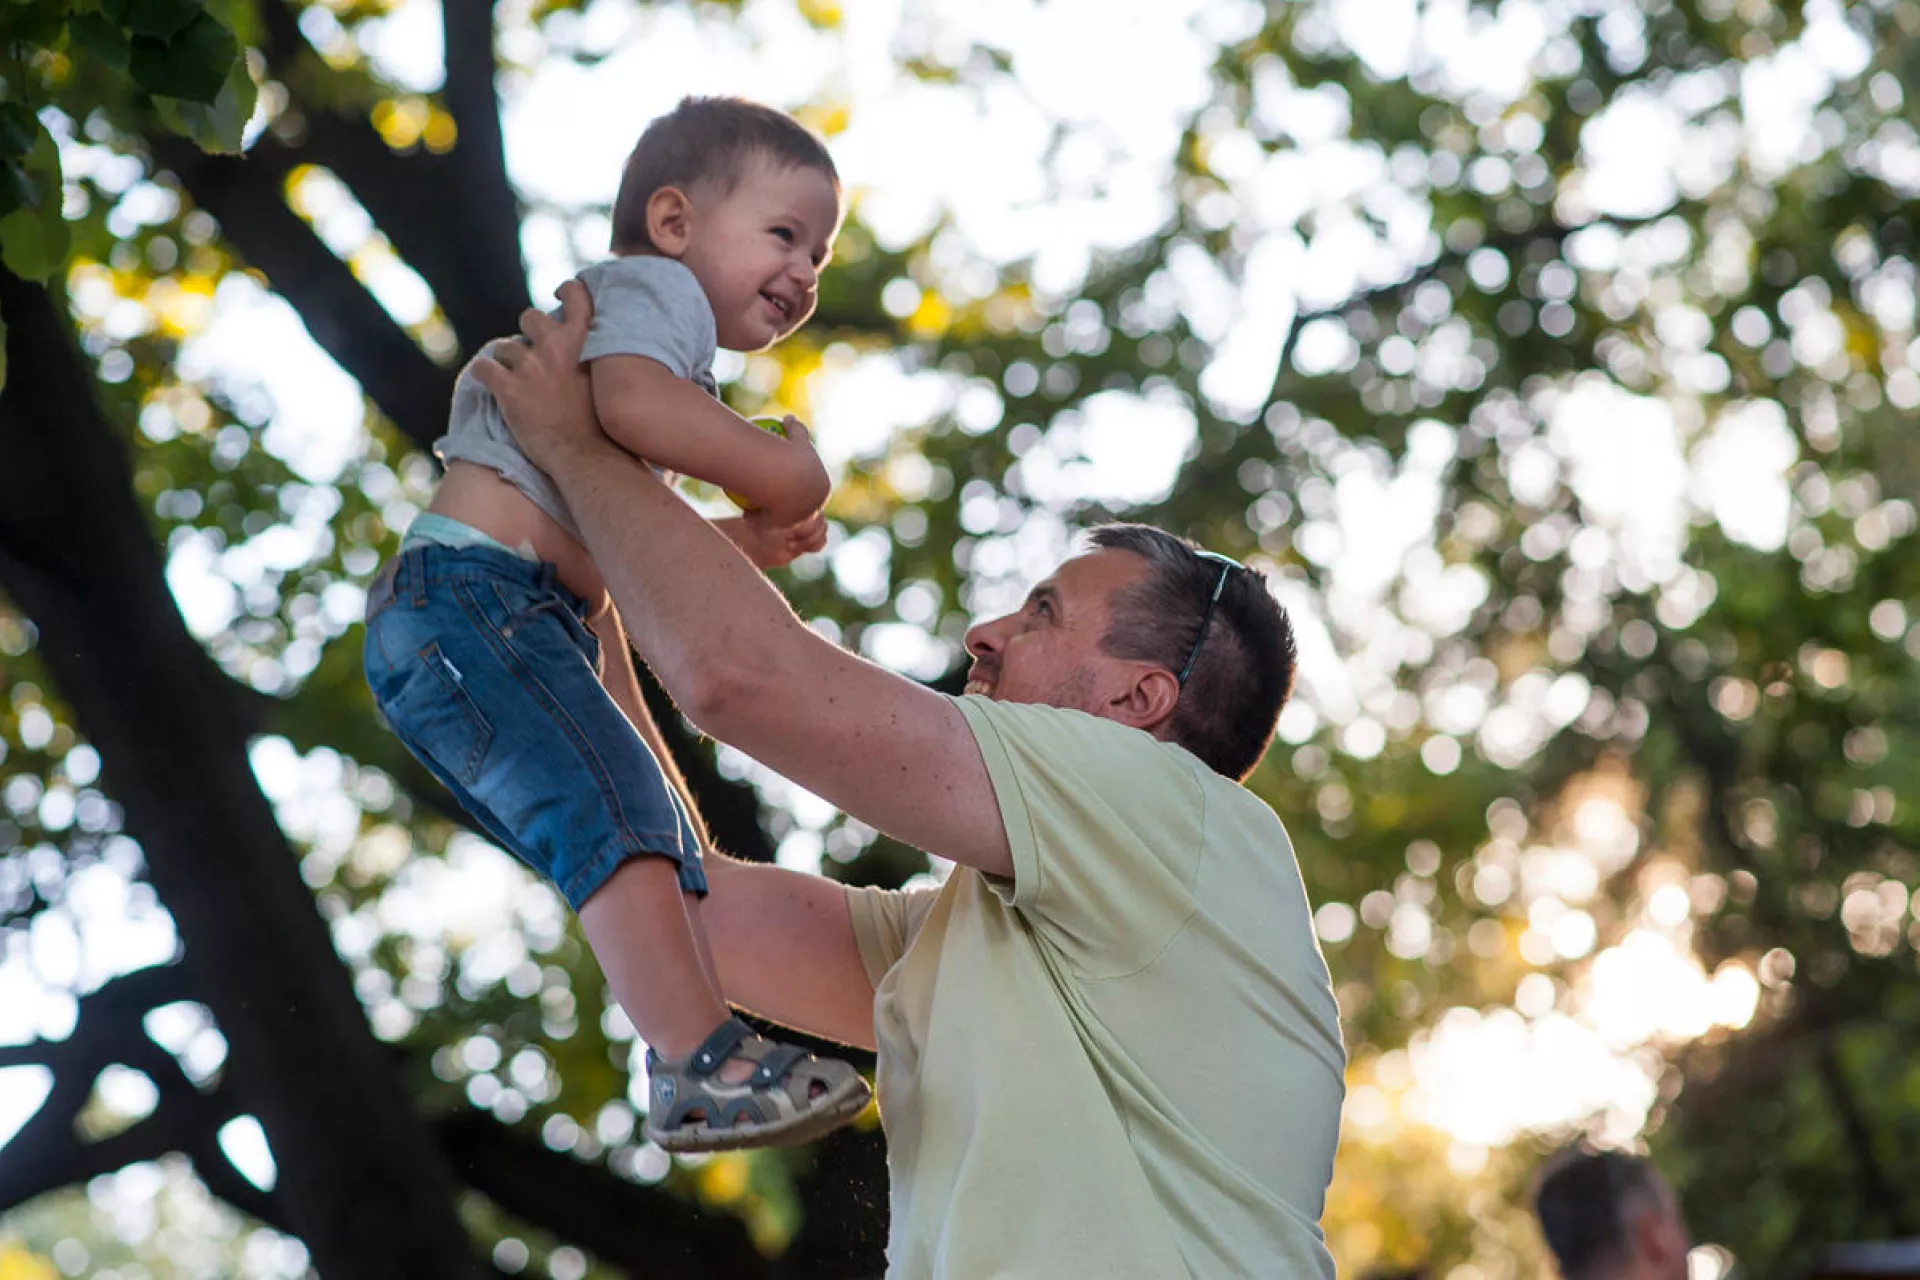 family mental health and well-being: a father plays with his son outside